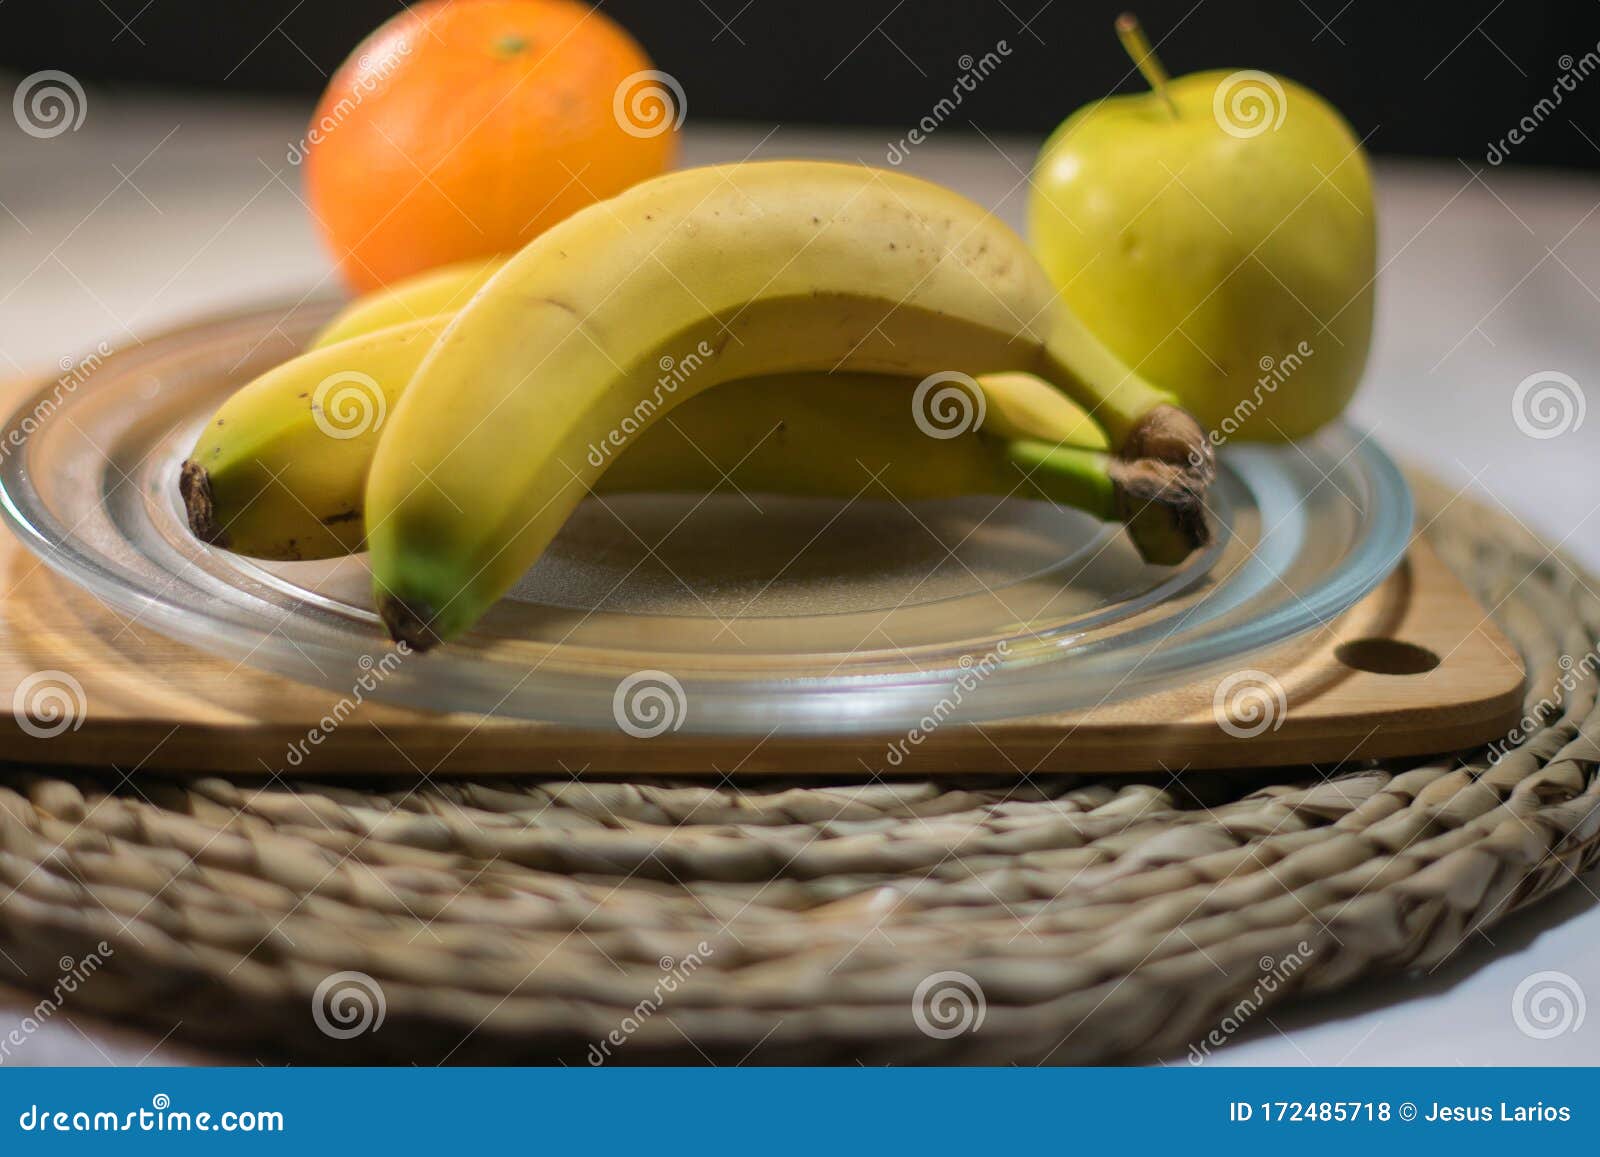 apple and orange bananas on a glass tray for dessert